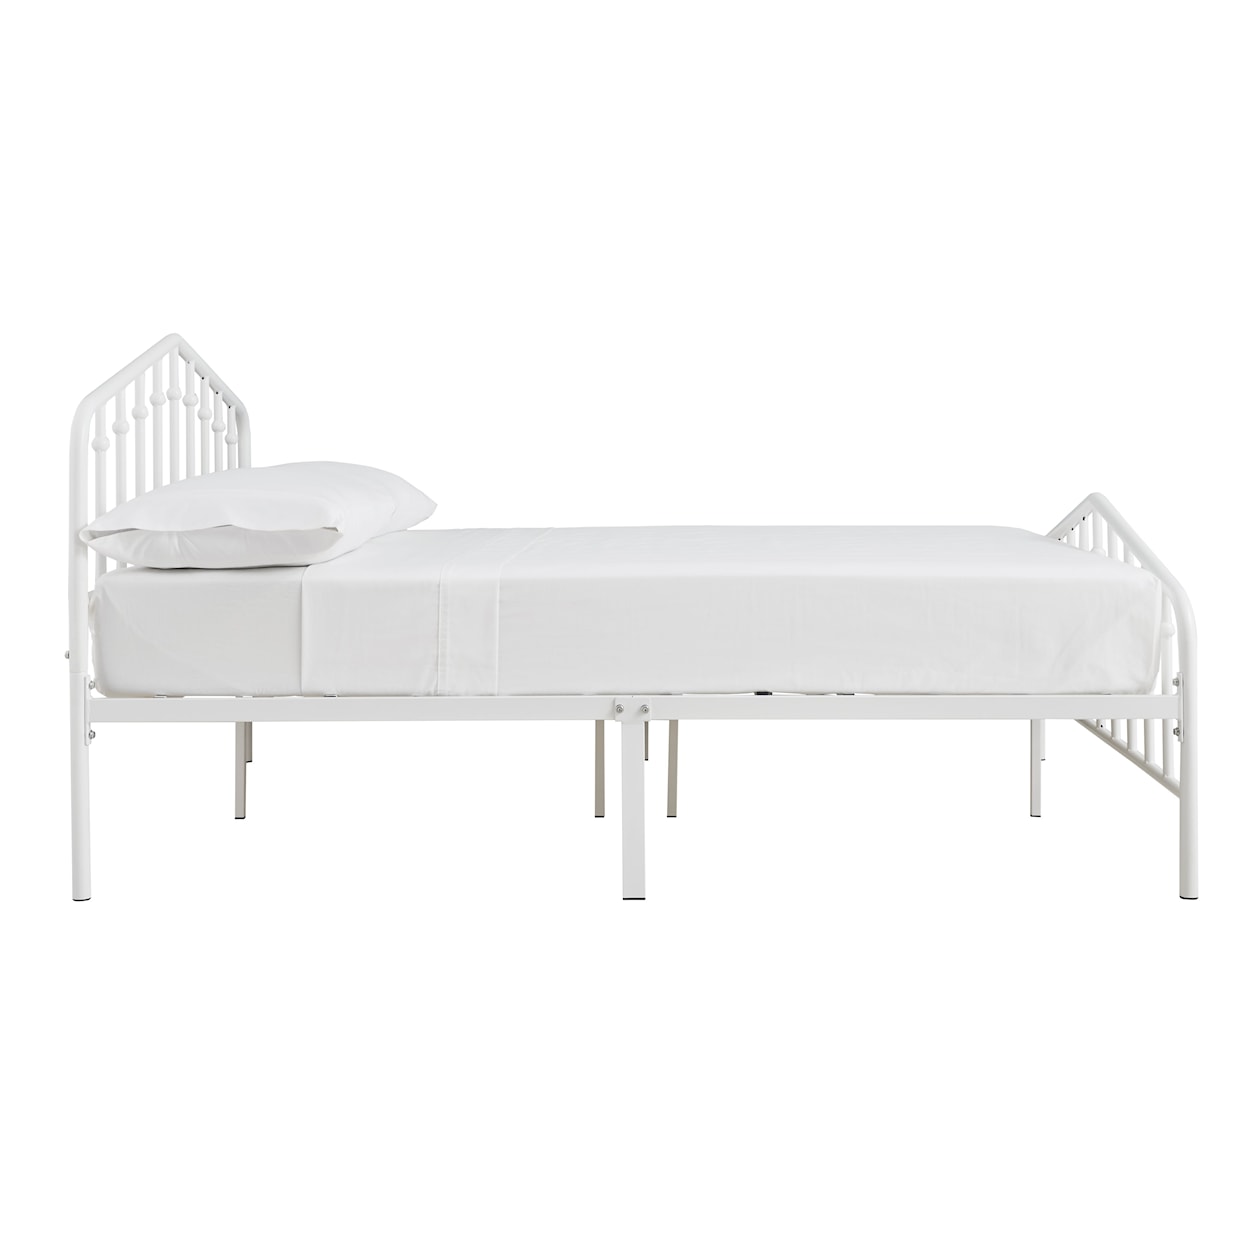 Signature Design by Ashley Trentlore Full Metal Bed